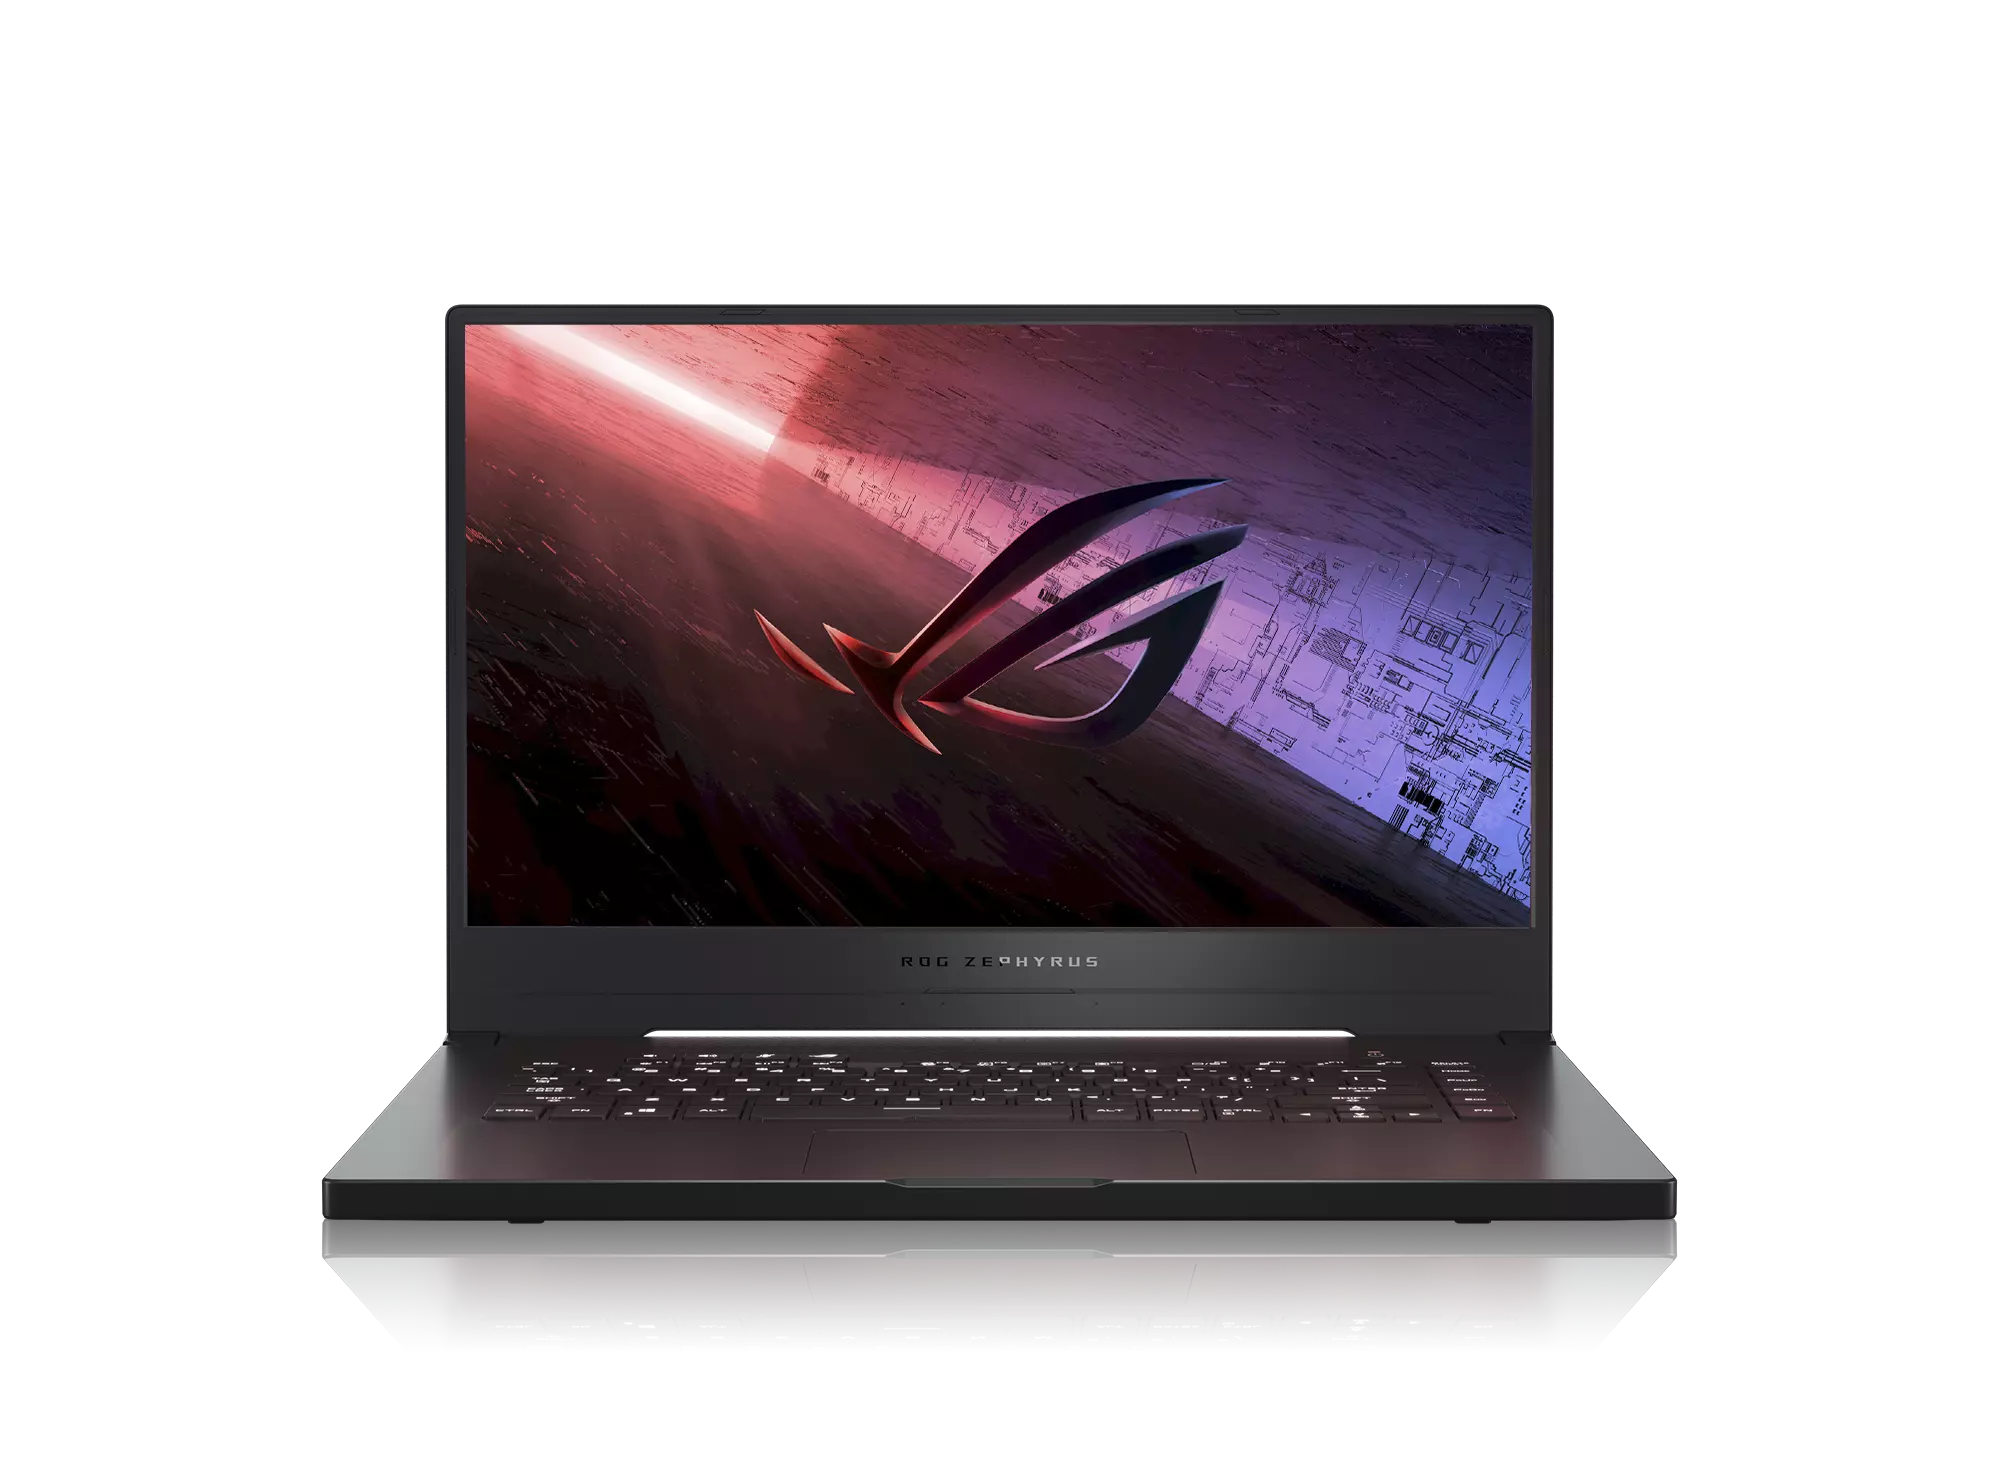 ASUS gaming laptop with pcie 4.0 x4 ssd storage drive